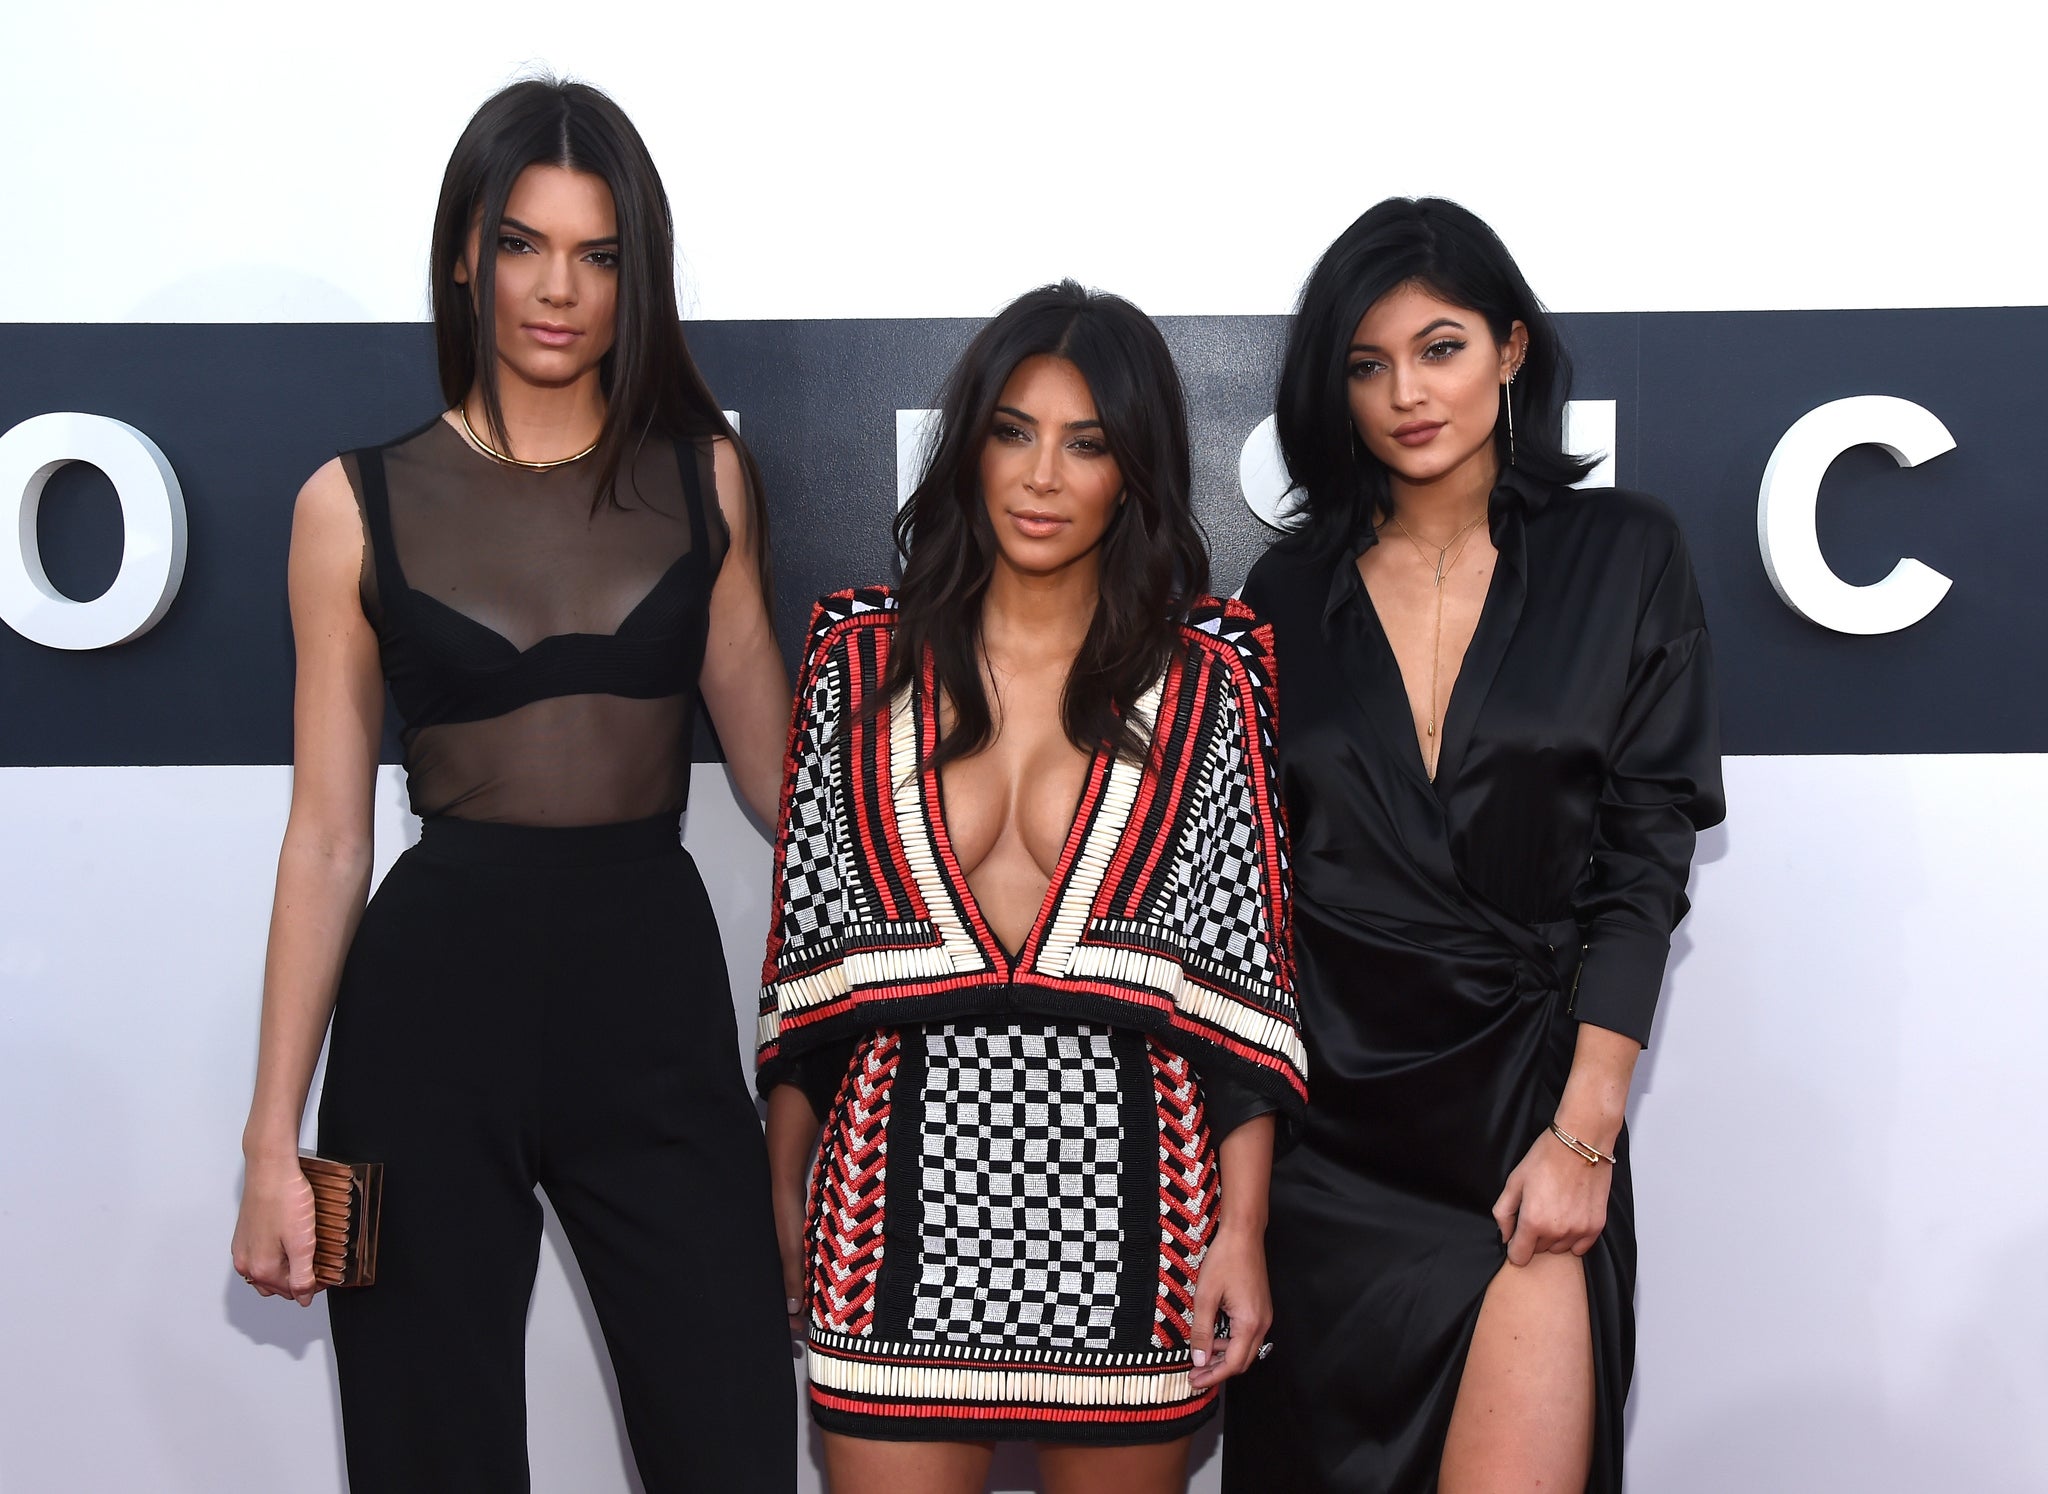 VMAs: The Kardashian-Jenner sisters have come under fire for texting through a silent tribute to Ferguson